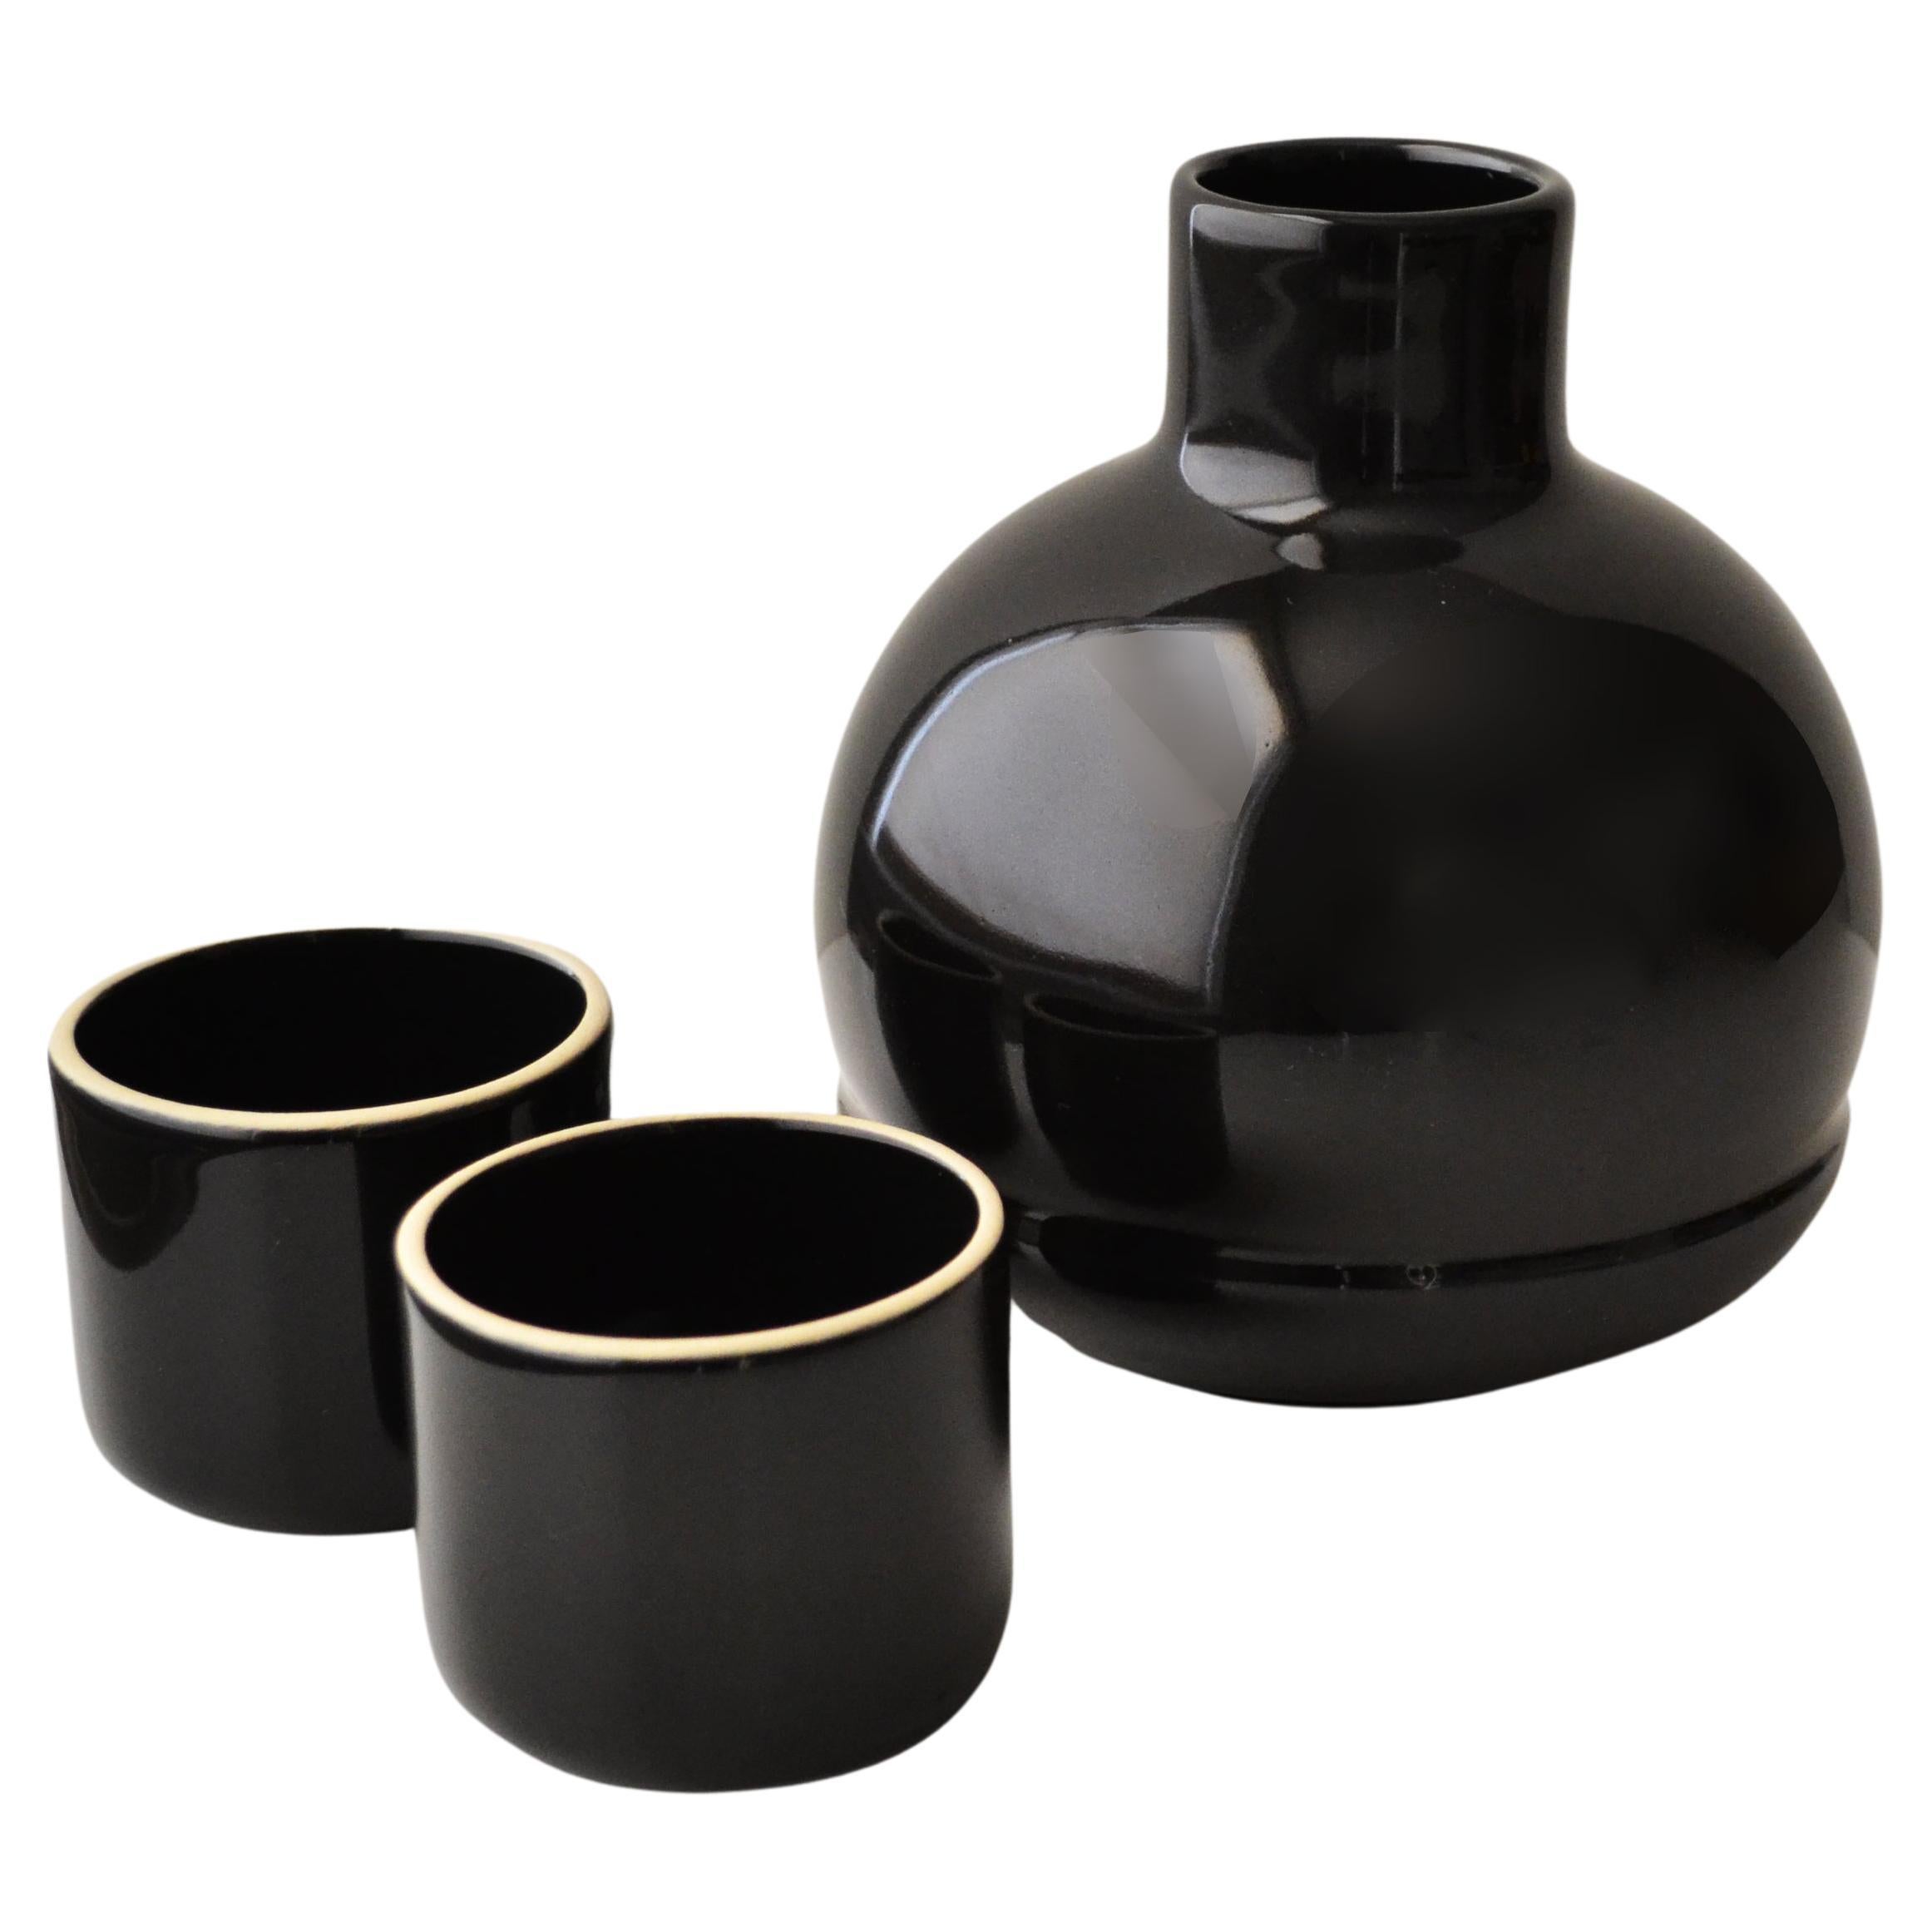 Special Edition Ceramic Carafe and Cups Bright Shine Black Jug Flower Vase Small